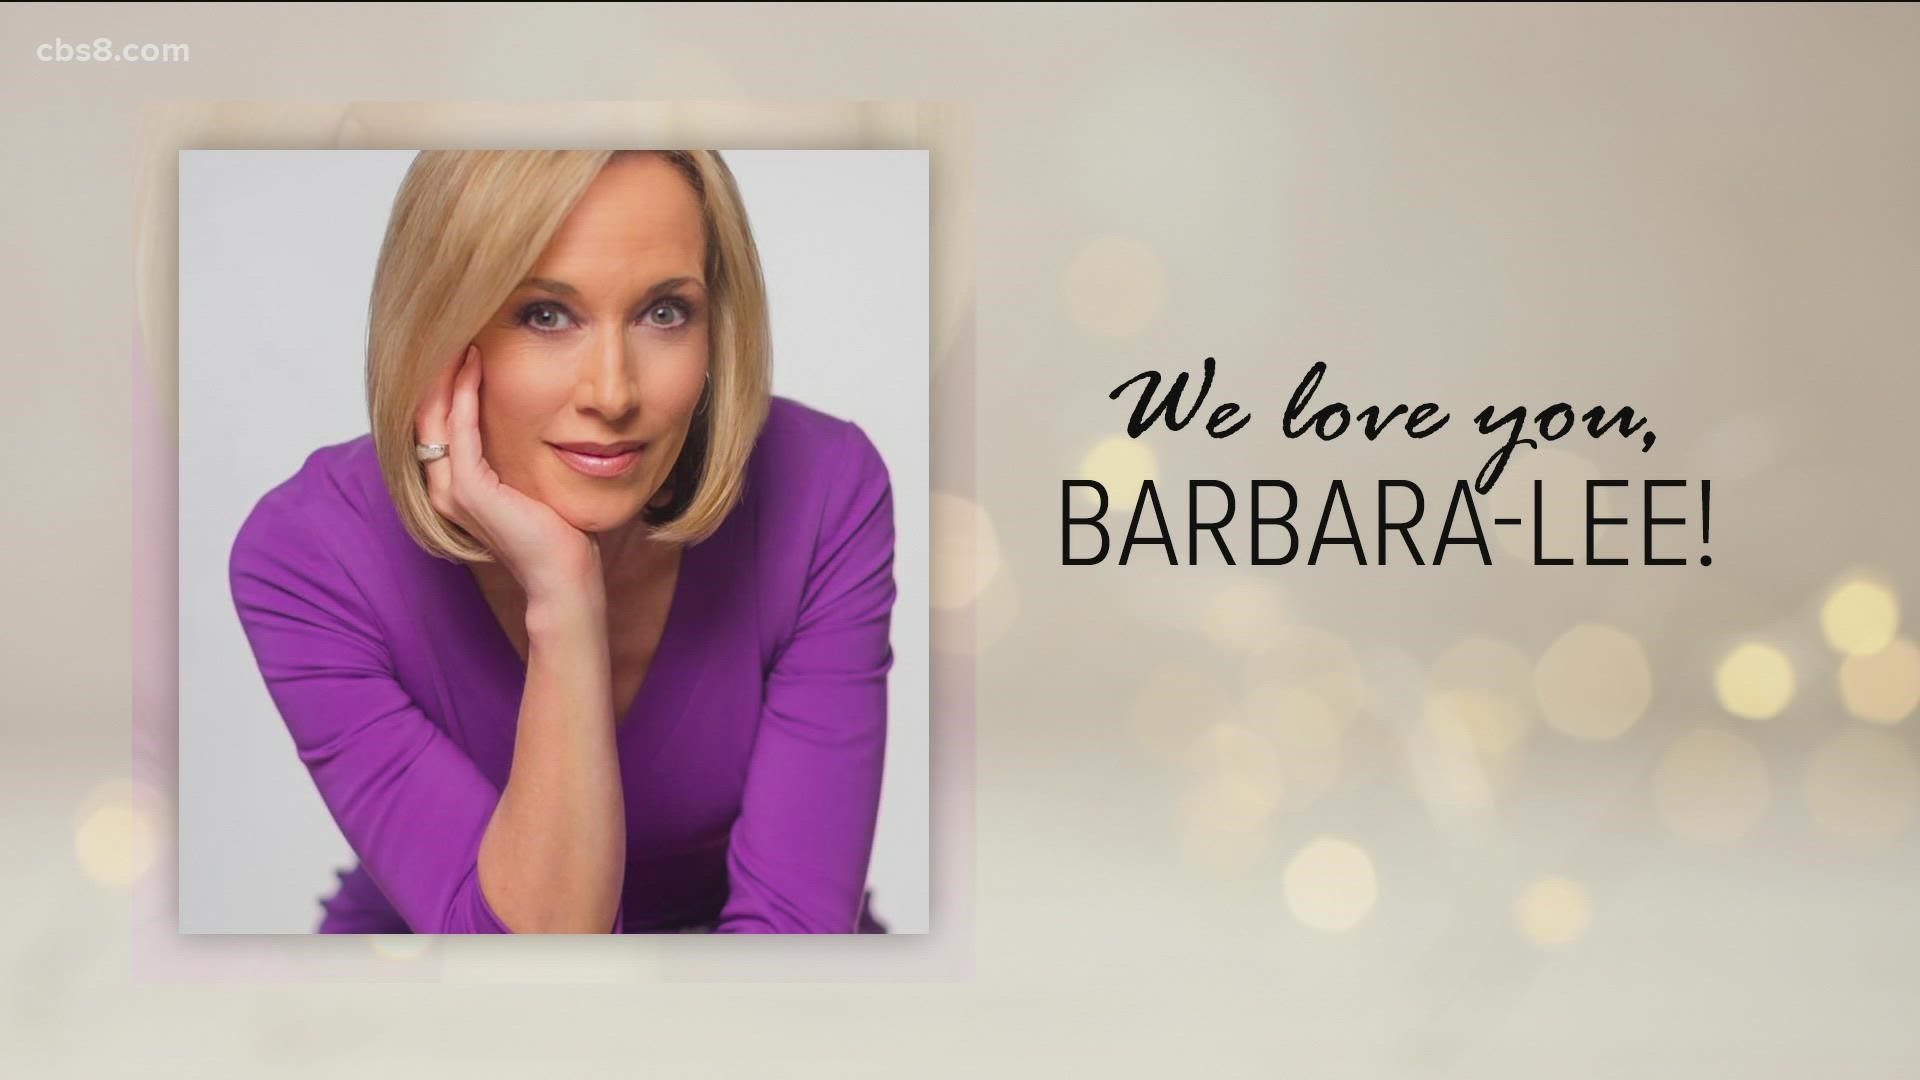 Barbara-Lee Edwards talks about life after suffering brain bleed in 2020 |  